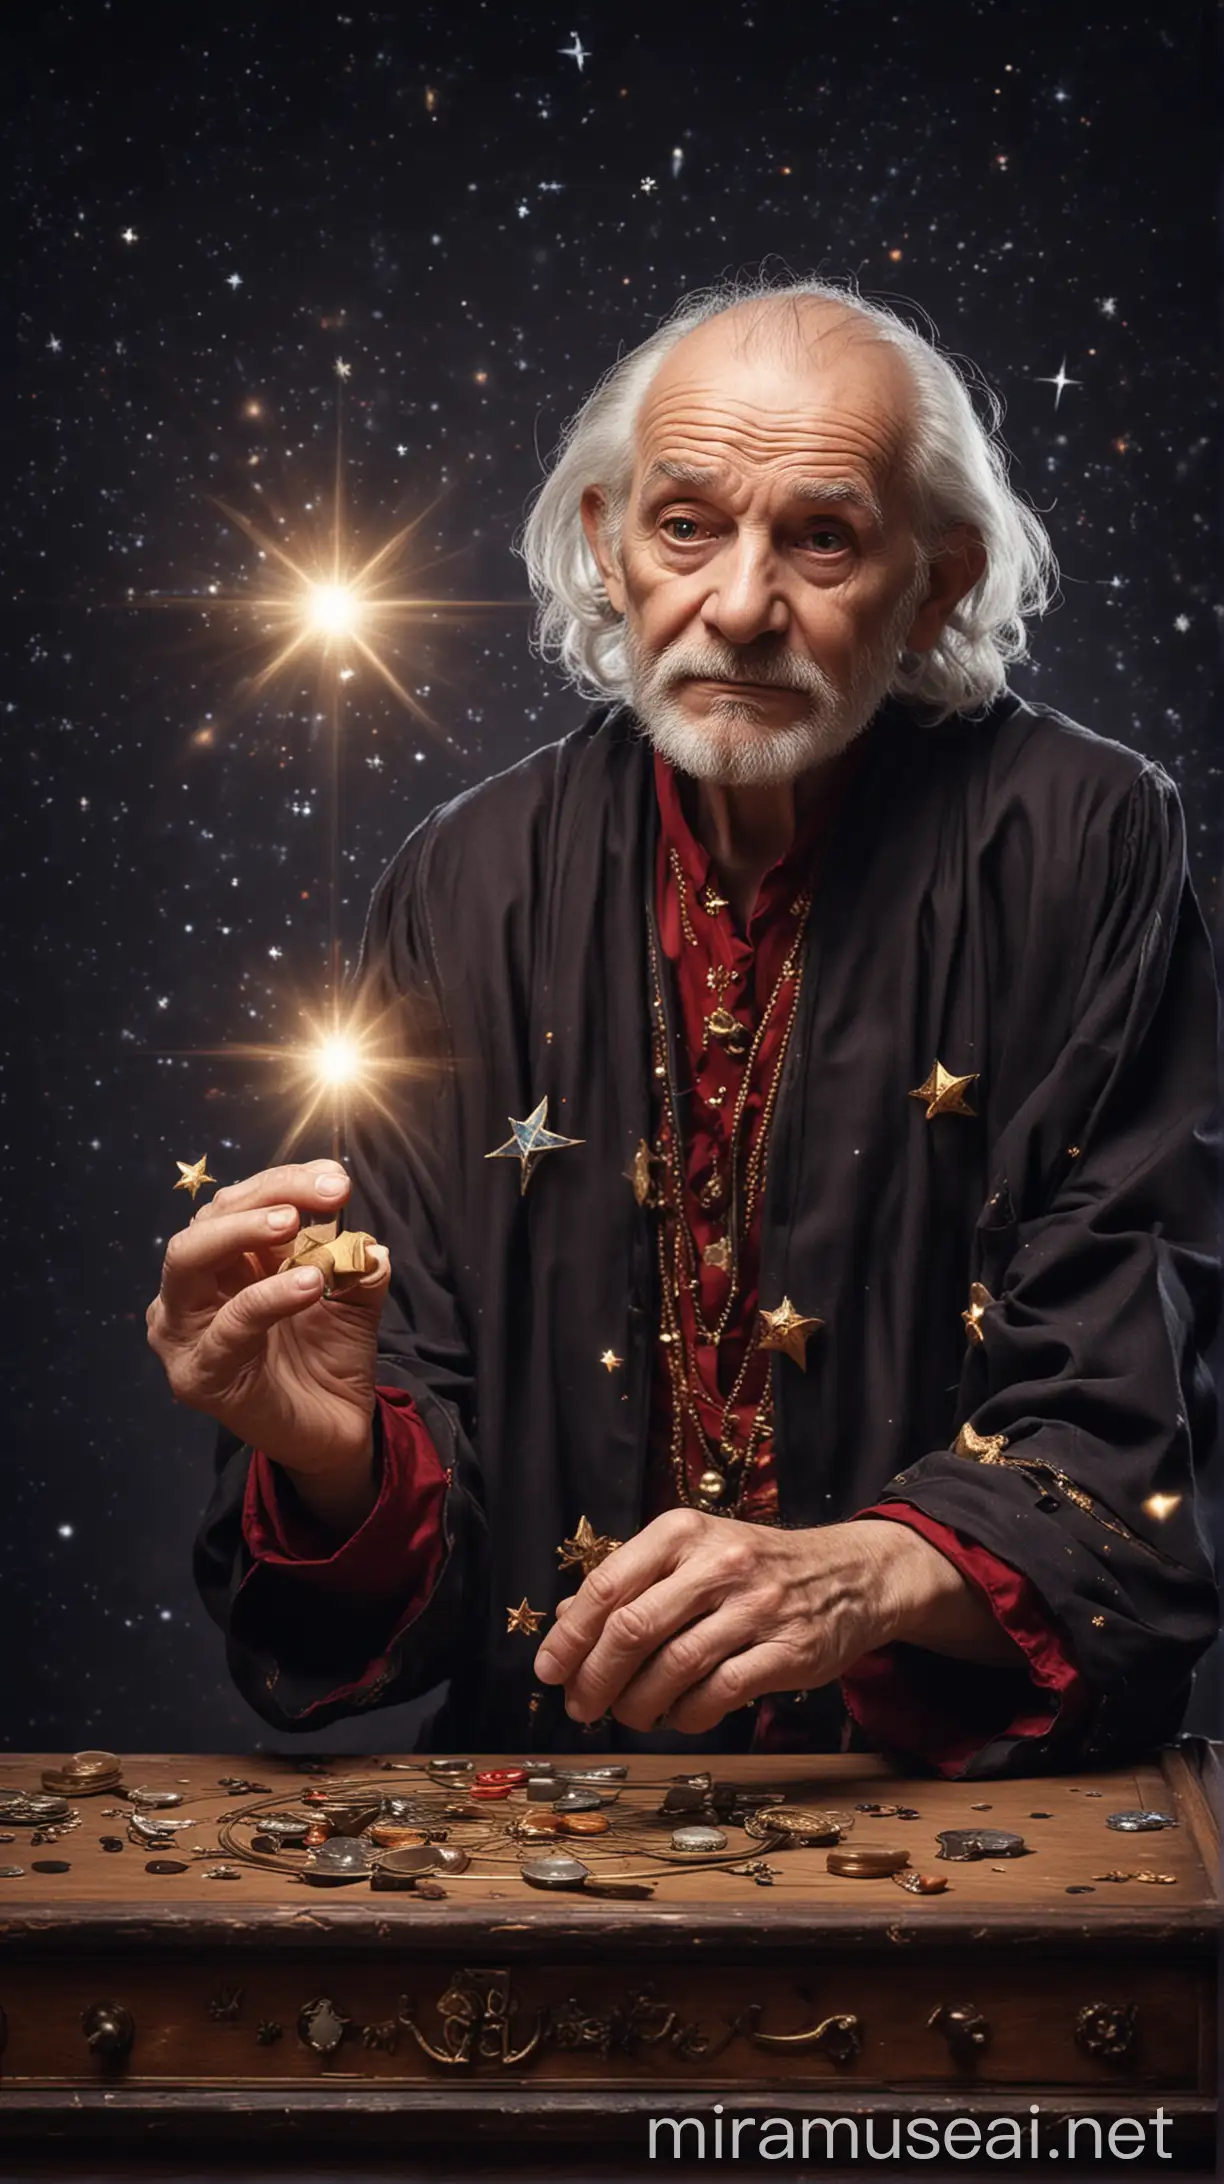 Elderly Astrologer Counting Stars in Magical Attire